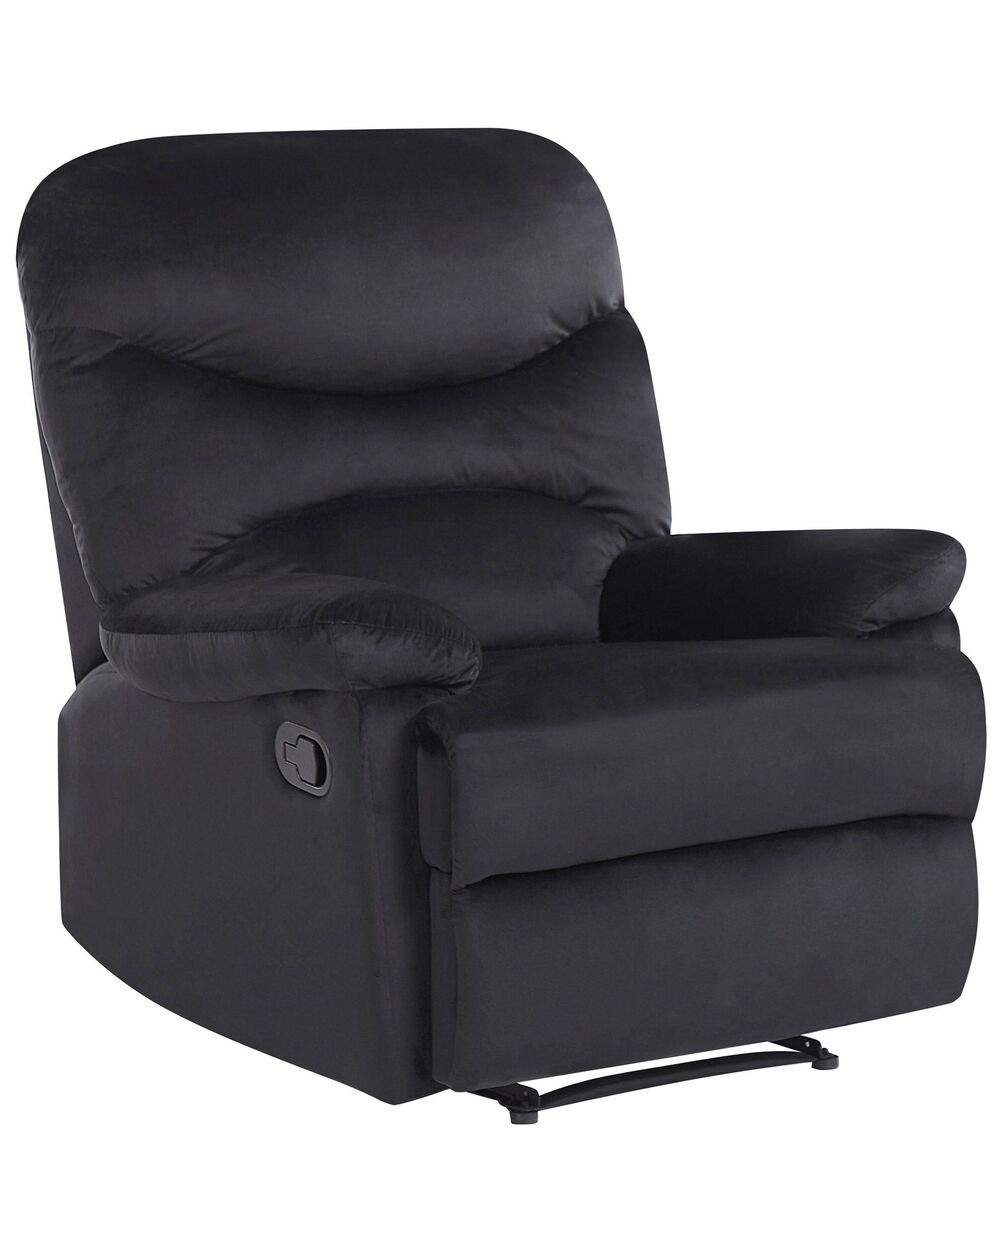 Reclining Chairs up to 70% OFF